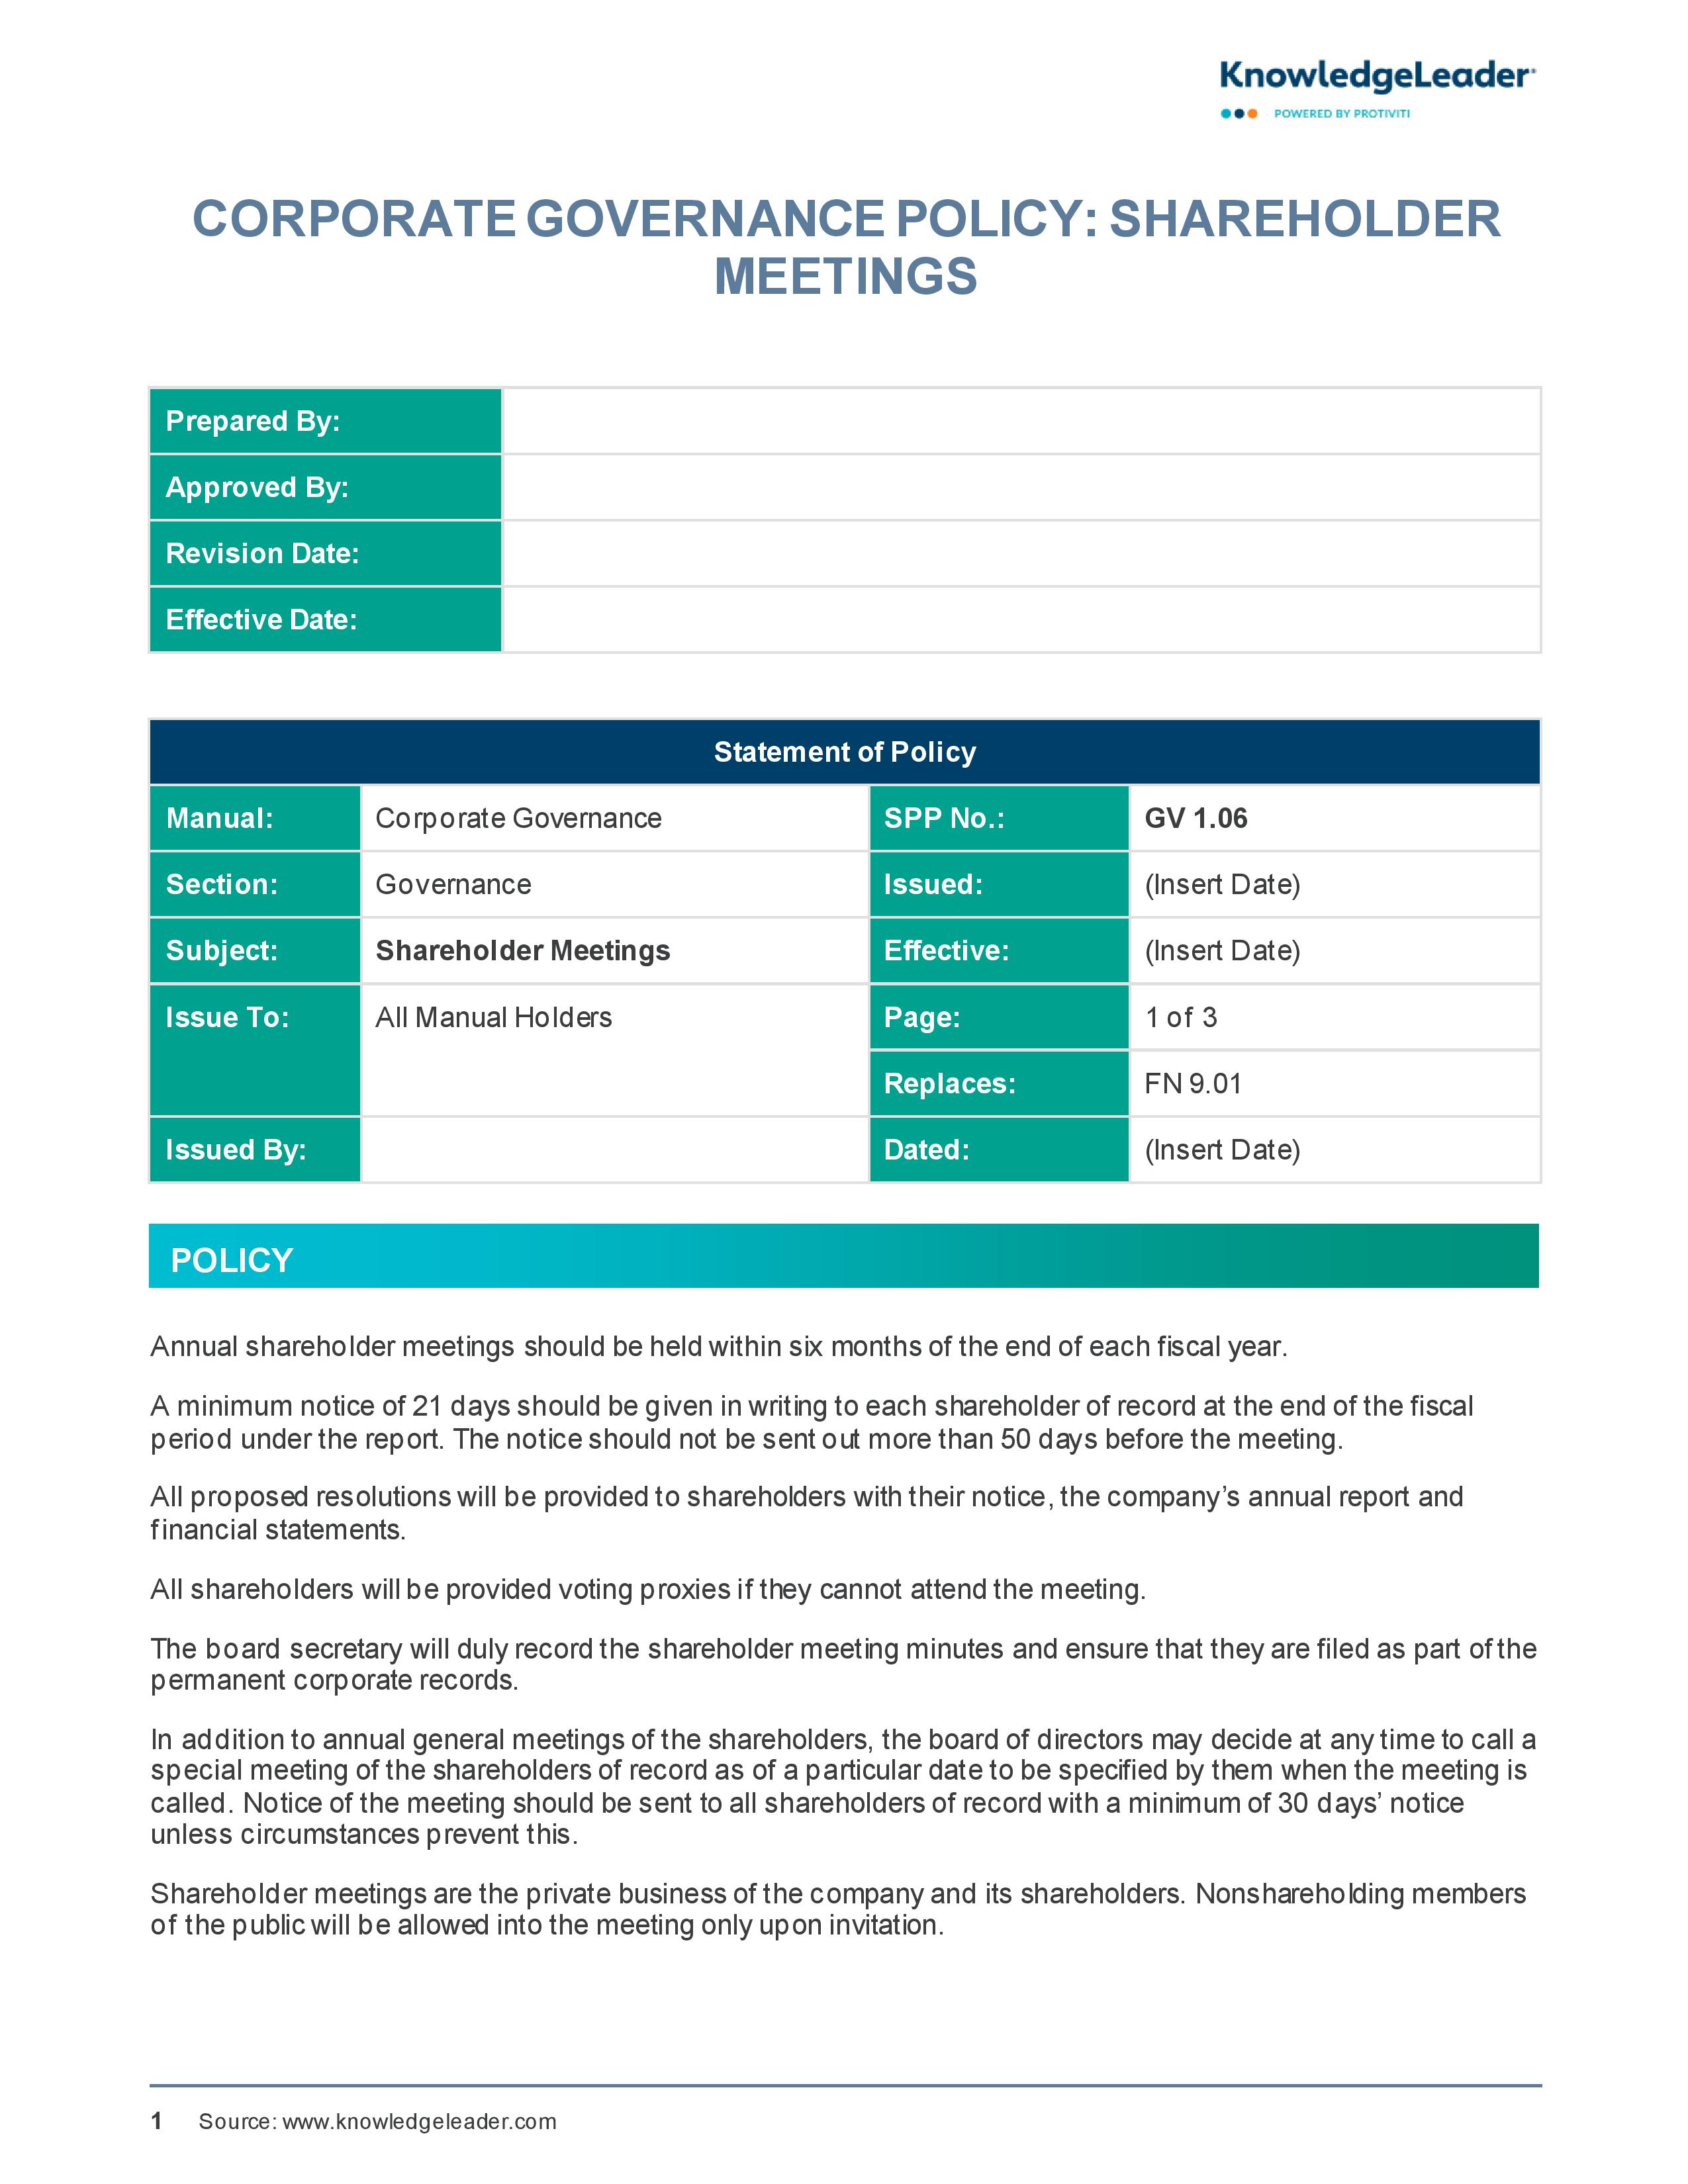 Screenshot of the first page of Corporate Governance Policy - Shareholder Meetings